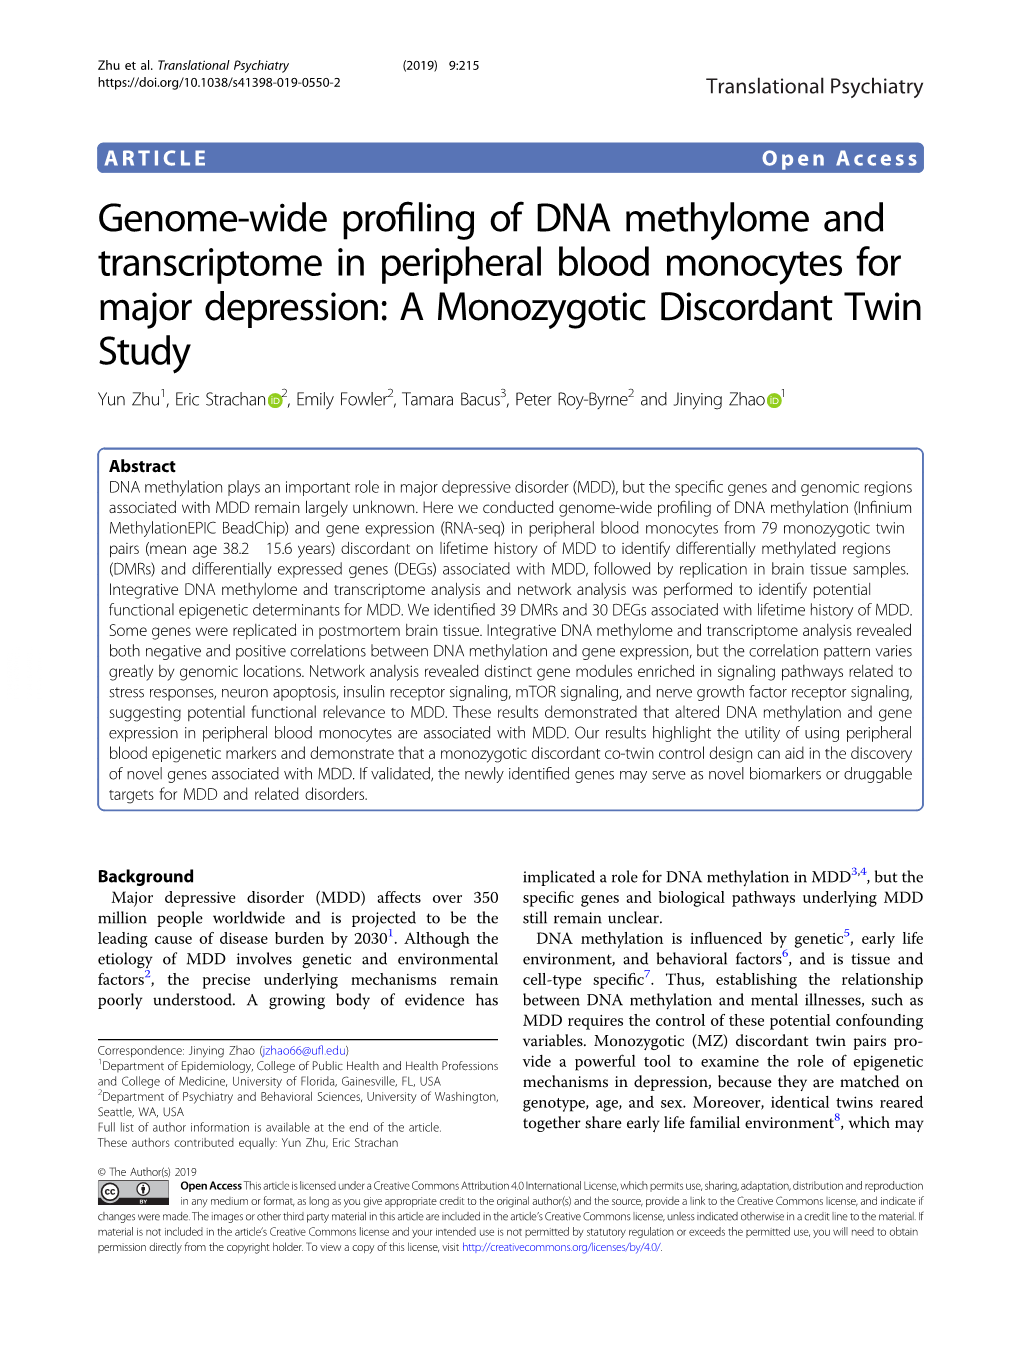 Genome-Wide Profiling of DNA Methylome And